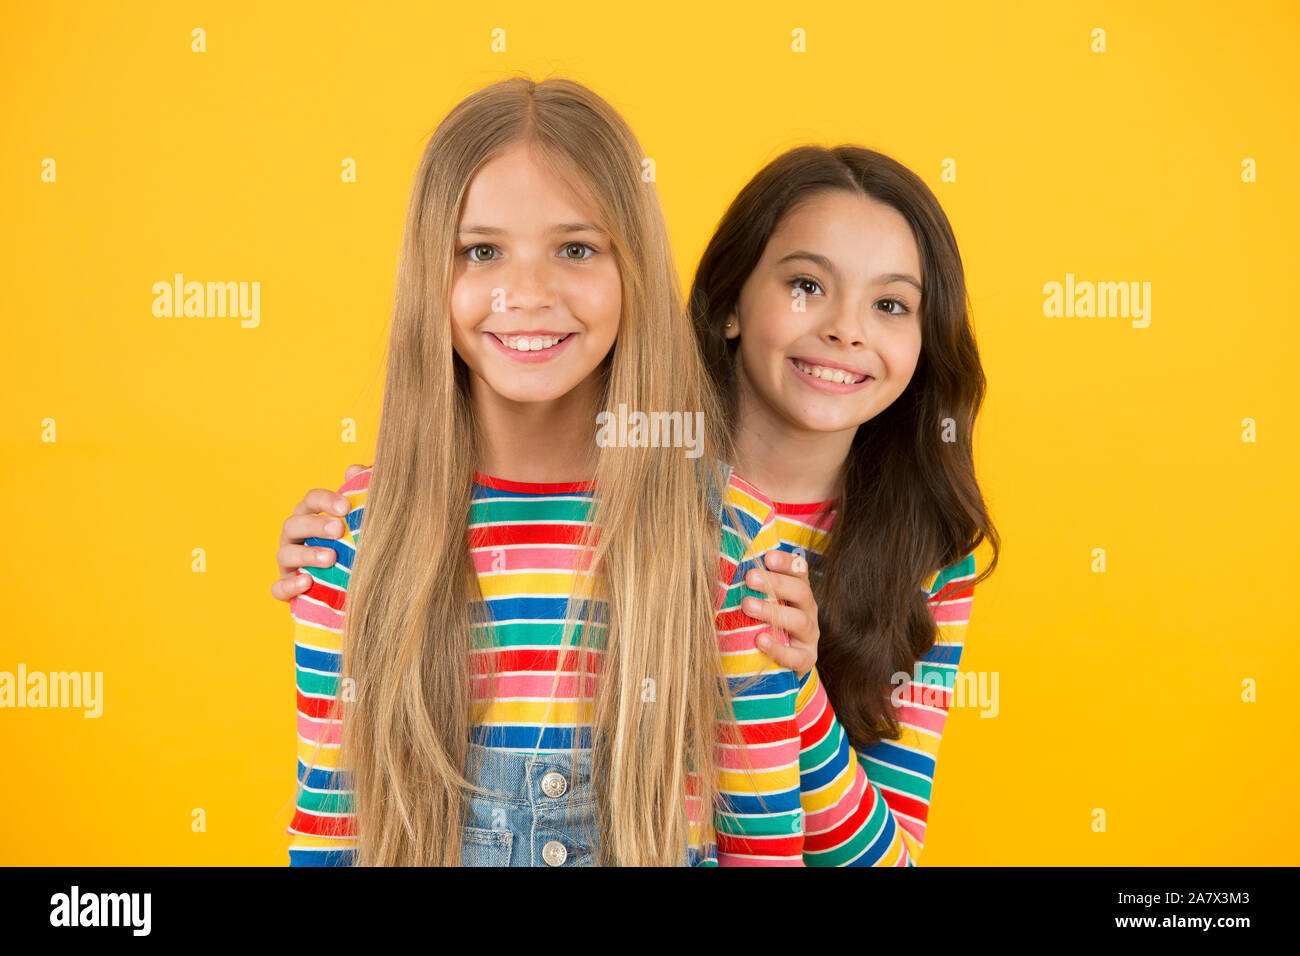 Children are the future. Happy children with long hair yellow background. Small children in casual style. Little children cute smiling. International childrens day. Stock Photo